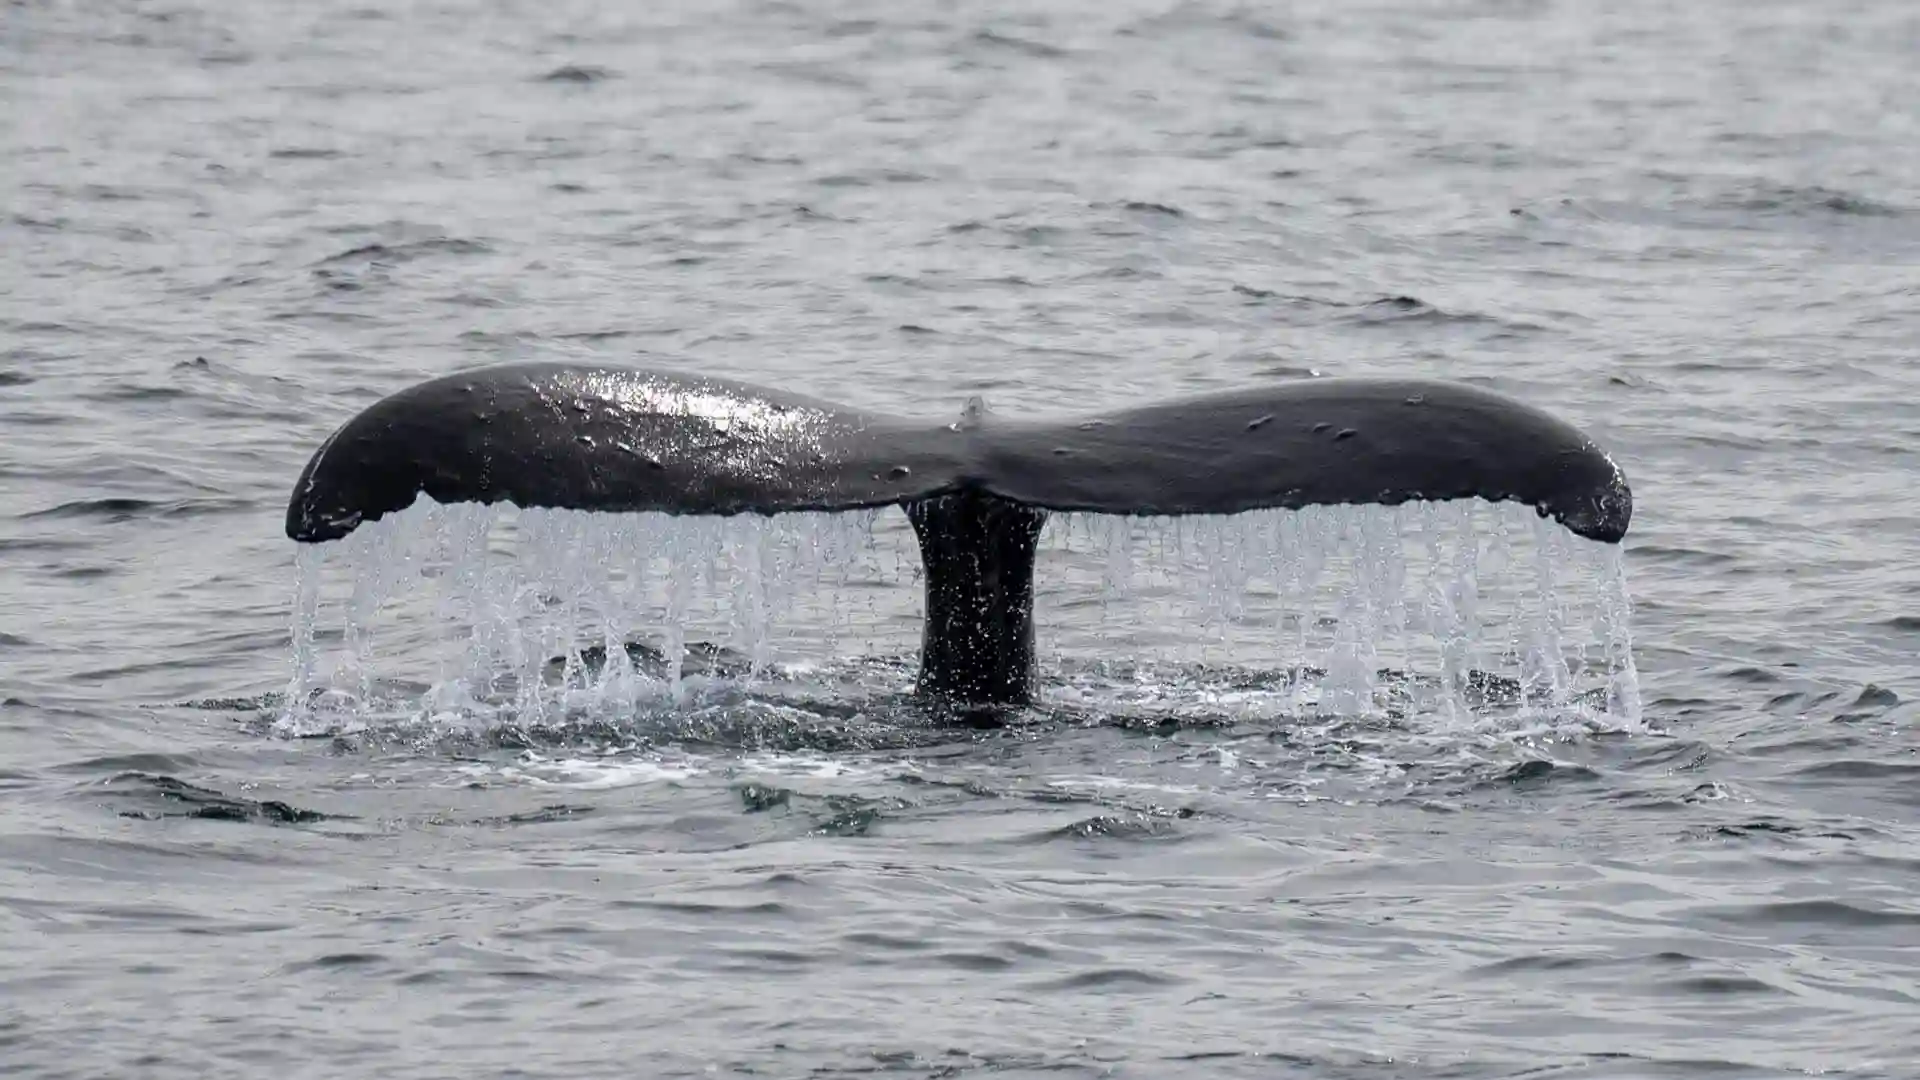 View of whale tail above ocean waters.